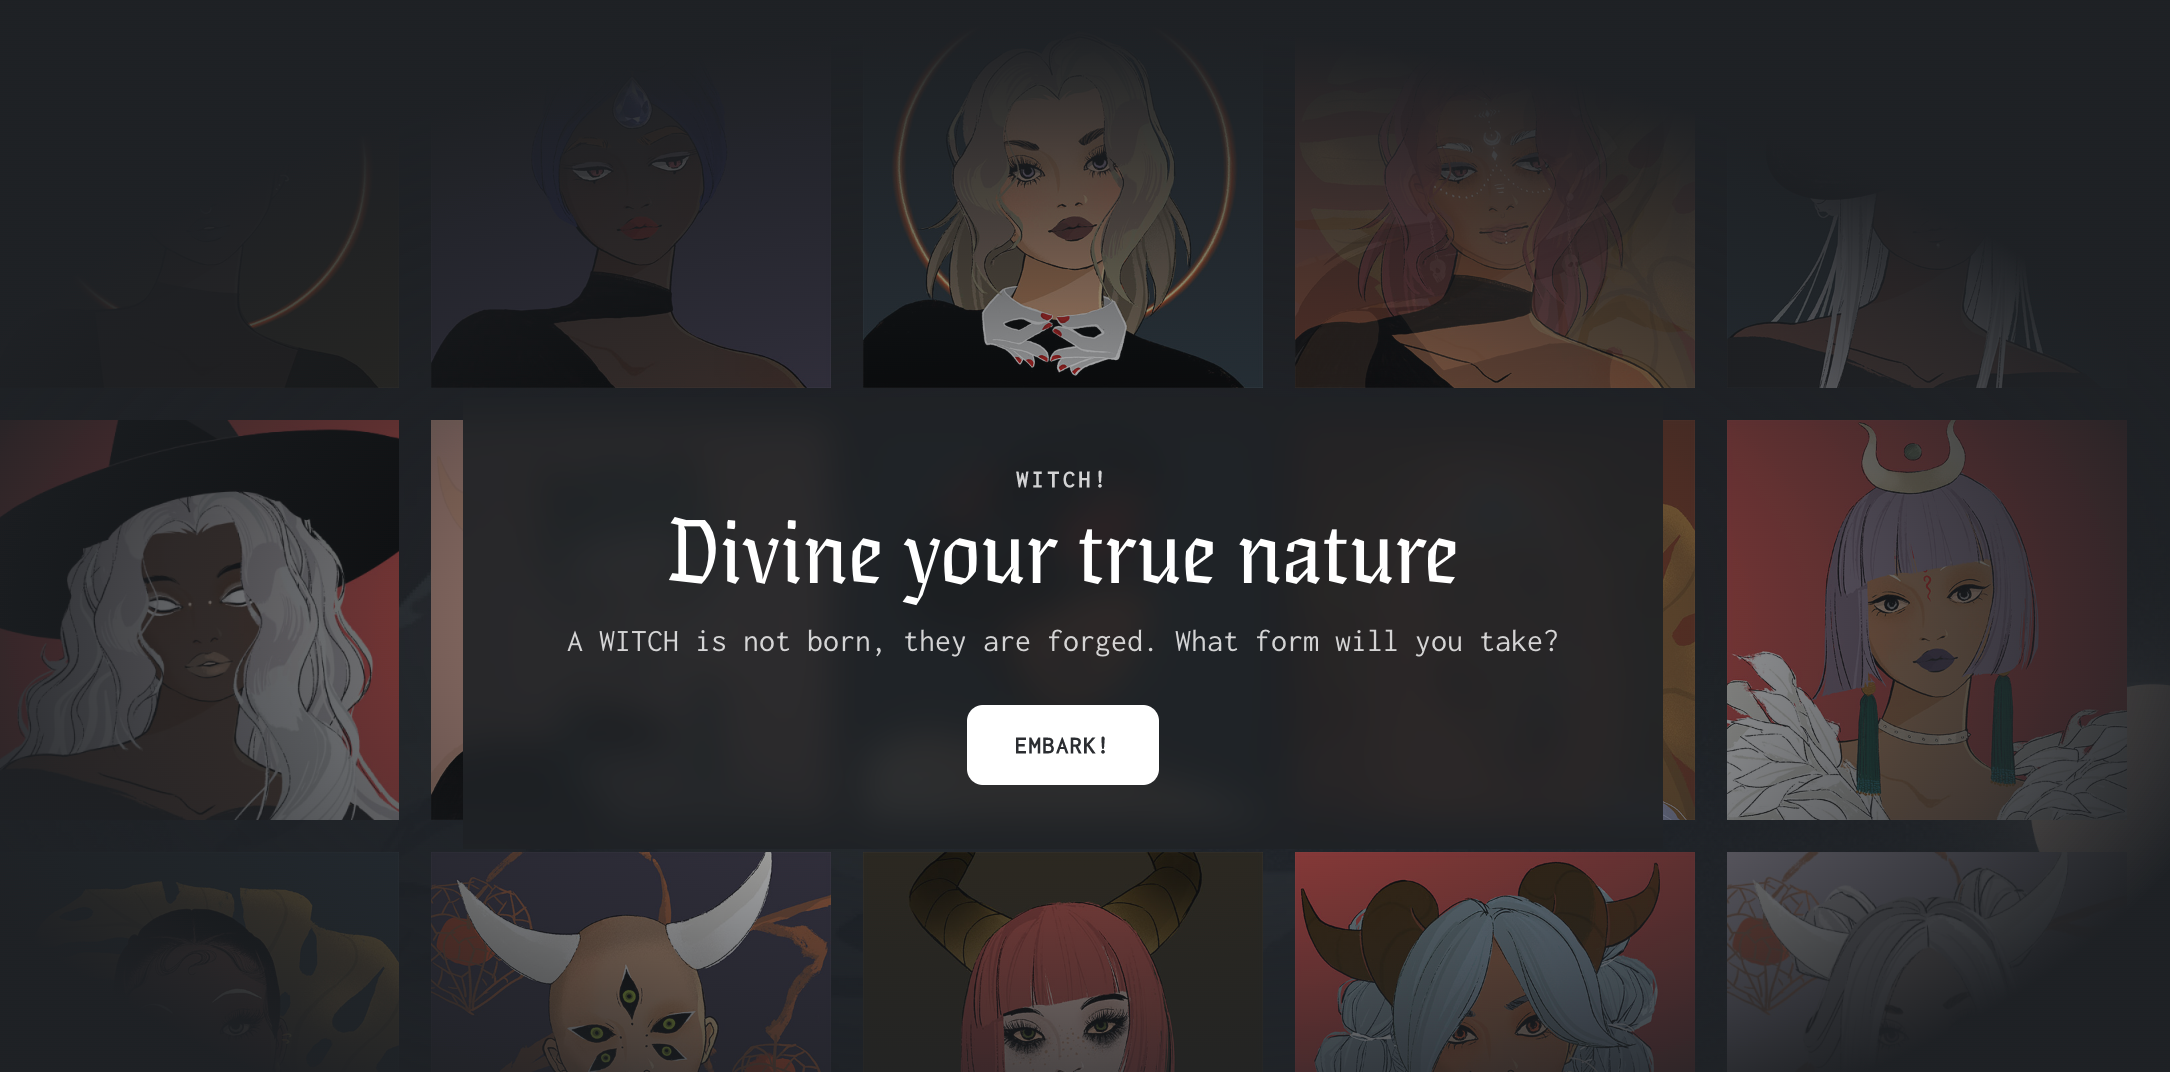 From the second you land on Crypto Coven’s website, you know you’ve entered another world entirely. This self-selecting mechanism helps them serve as a magnet for the audience that would most align with their community. (via: https://www.cryptocoven.xyz/lore) 